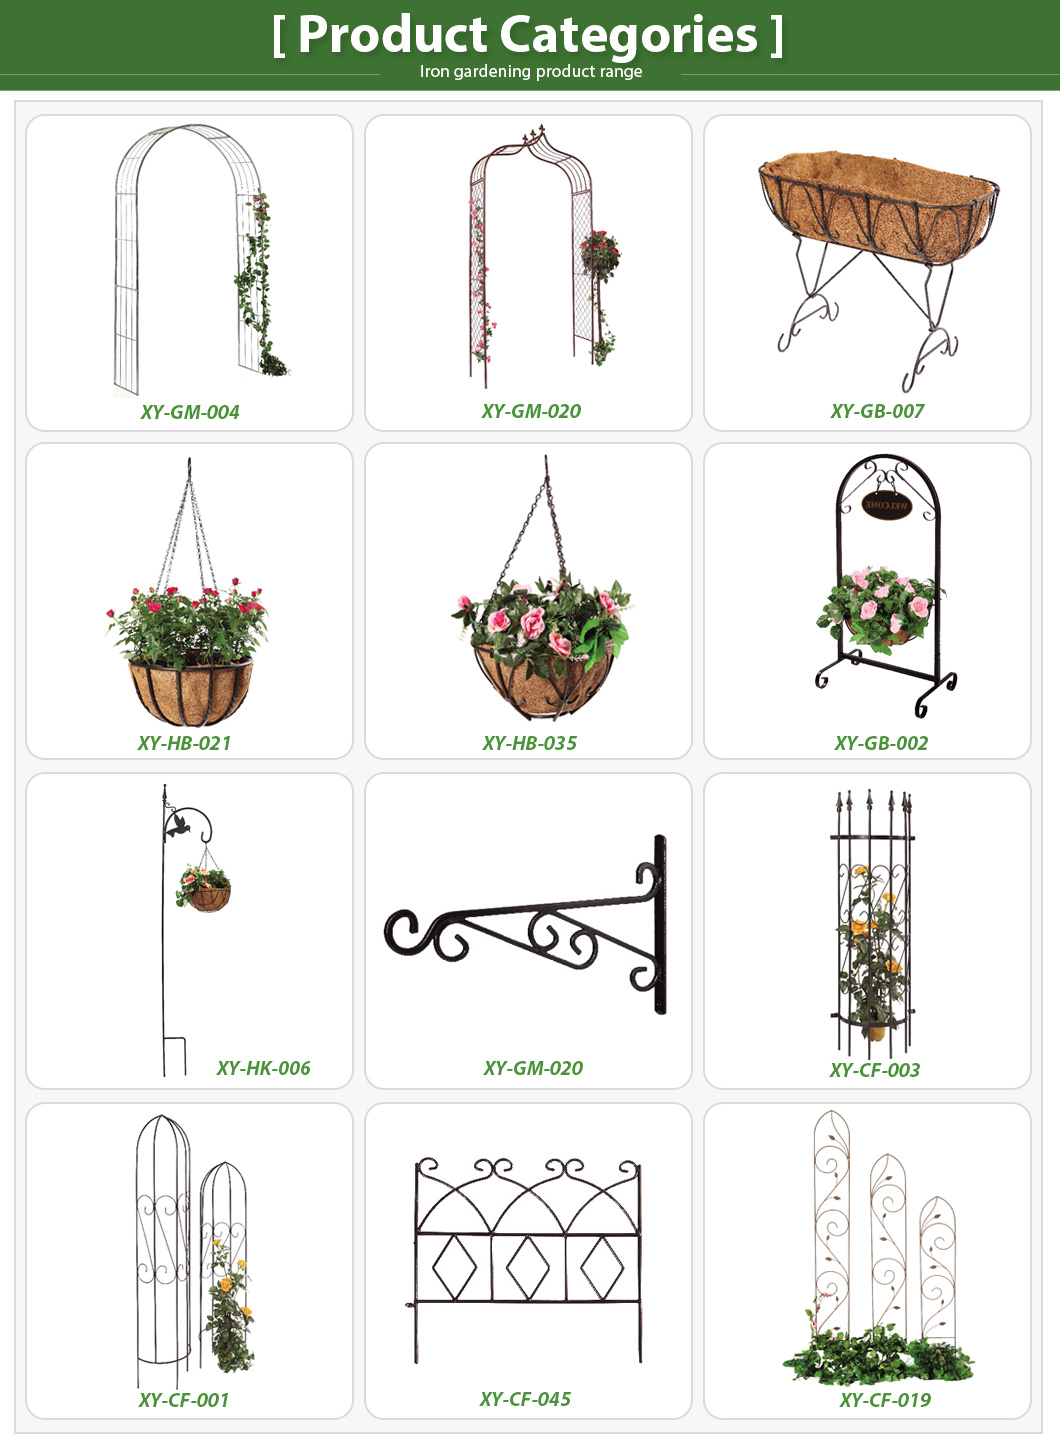 Ancient Iron Wire Hanging Flower Baskets with Coco Liner and Chain (Xy50332)